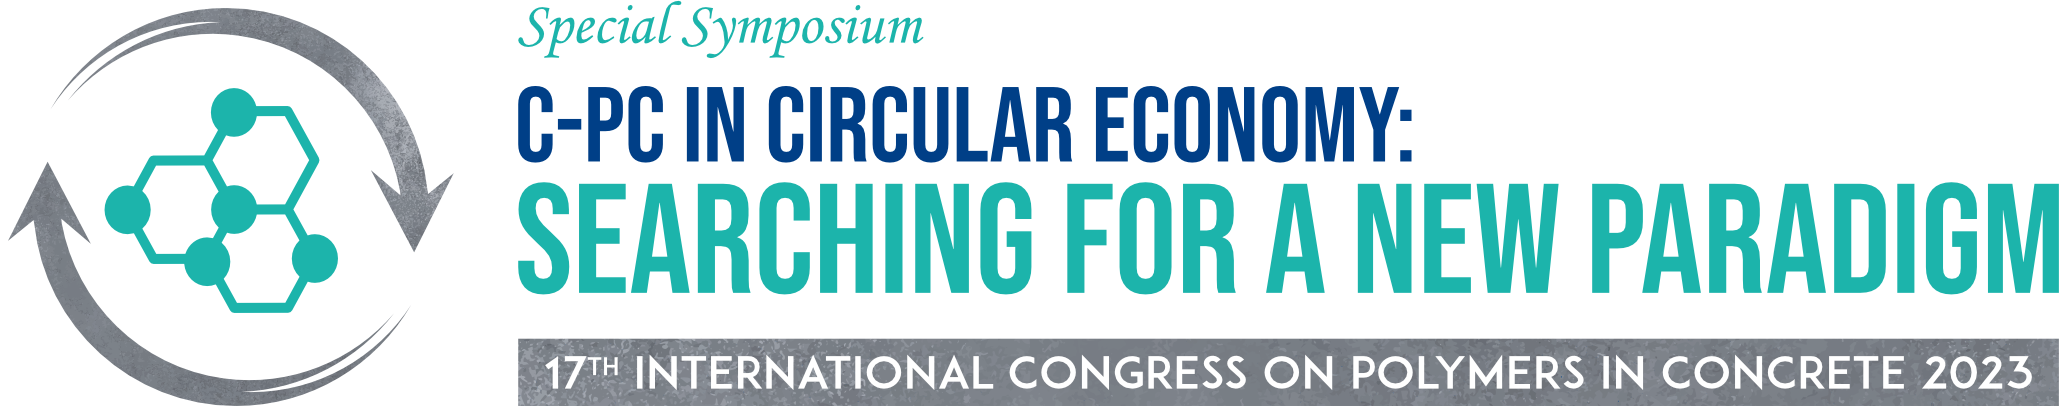 ICPIC 2023 Special Symposium: “C-PC in Circular Economy: Searching for a New Paradigm